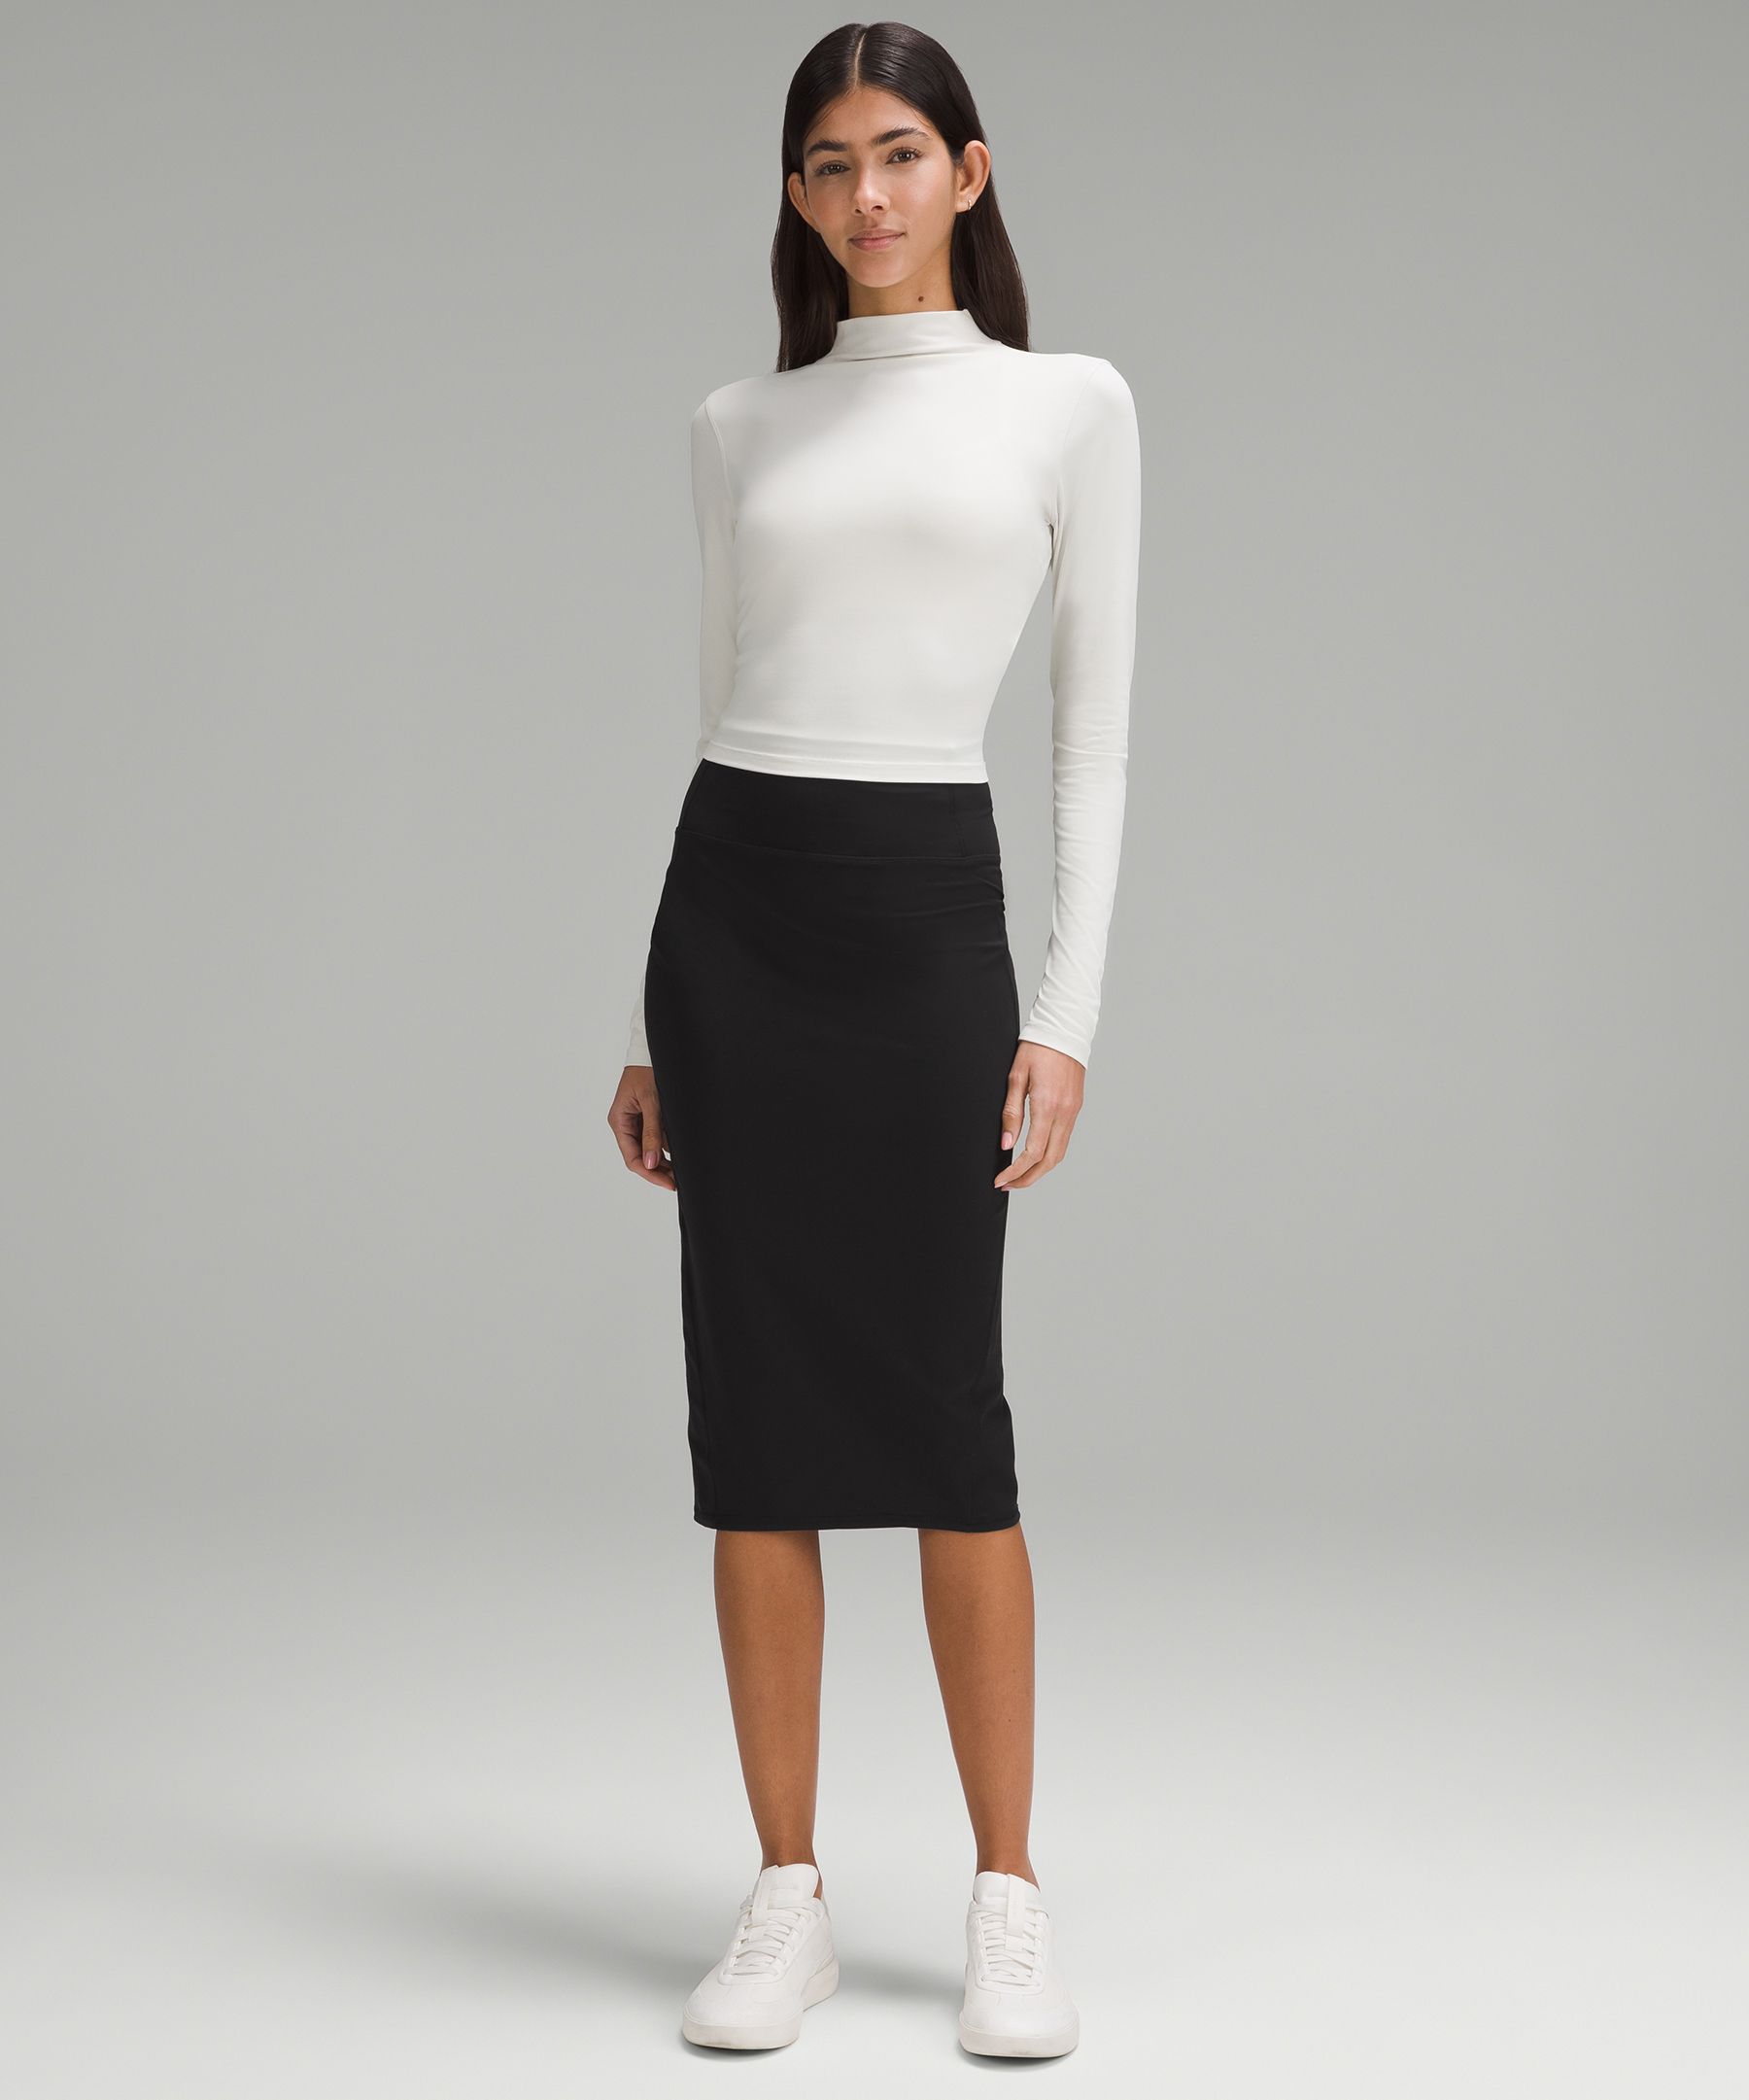 High-waisted office short a-waisted skirt in black with pants in - Black  skirt spread to school shirt